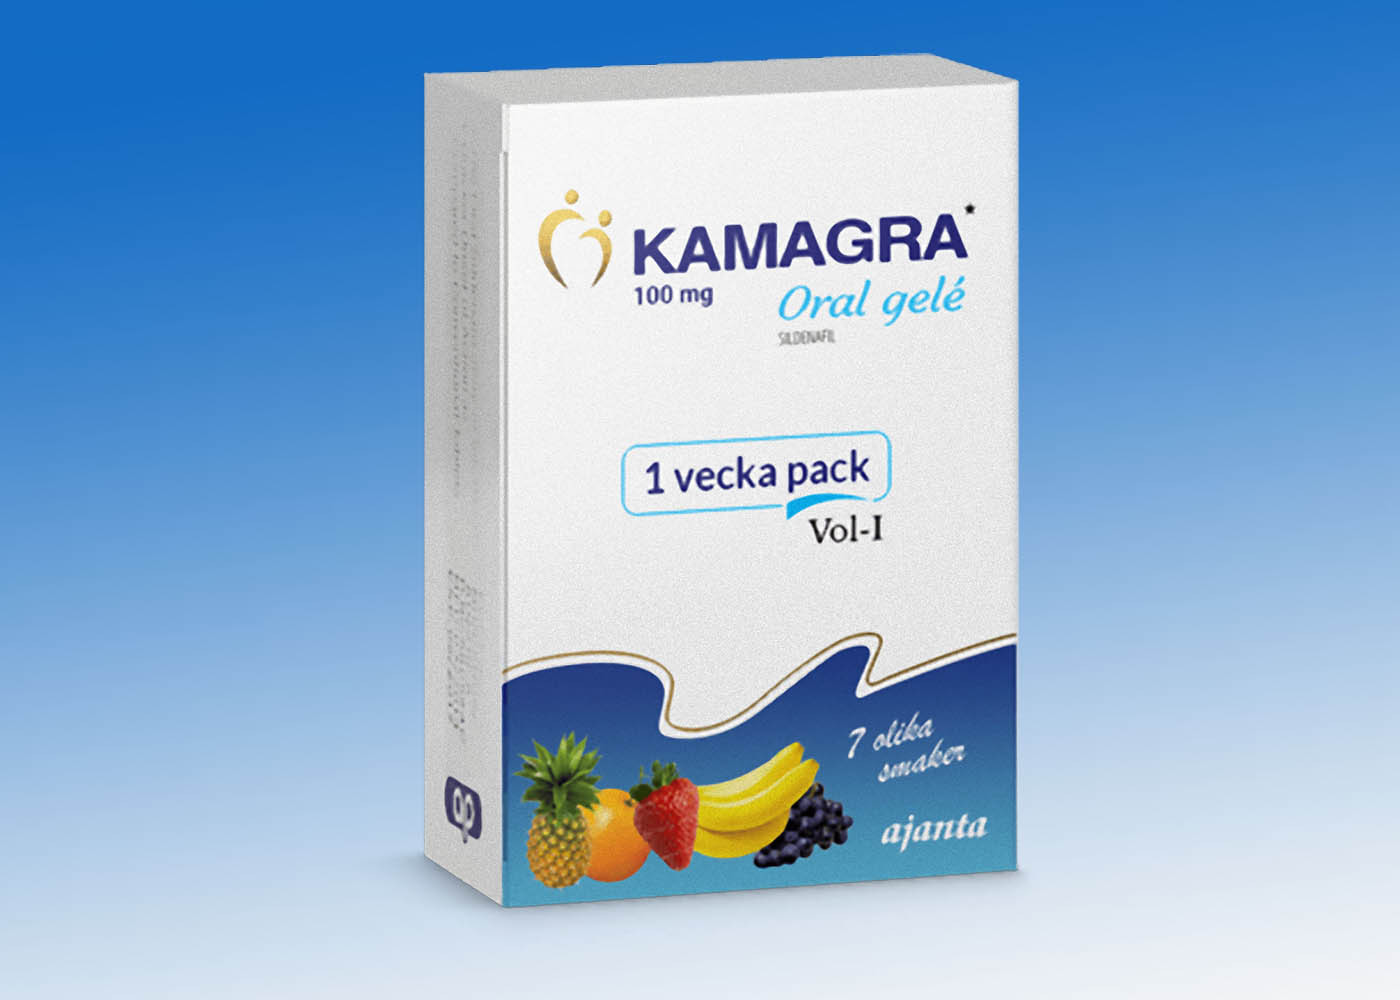 Know what are the guarantees you get when using one of the Kamagra products on your body